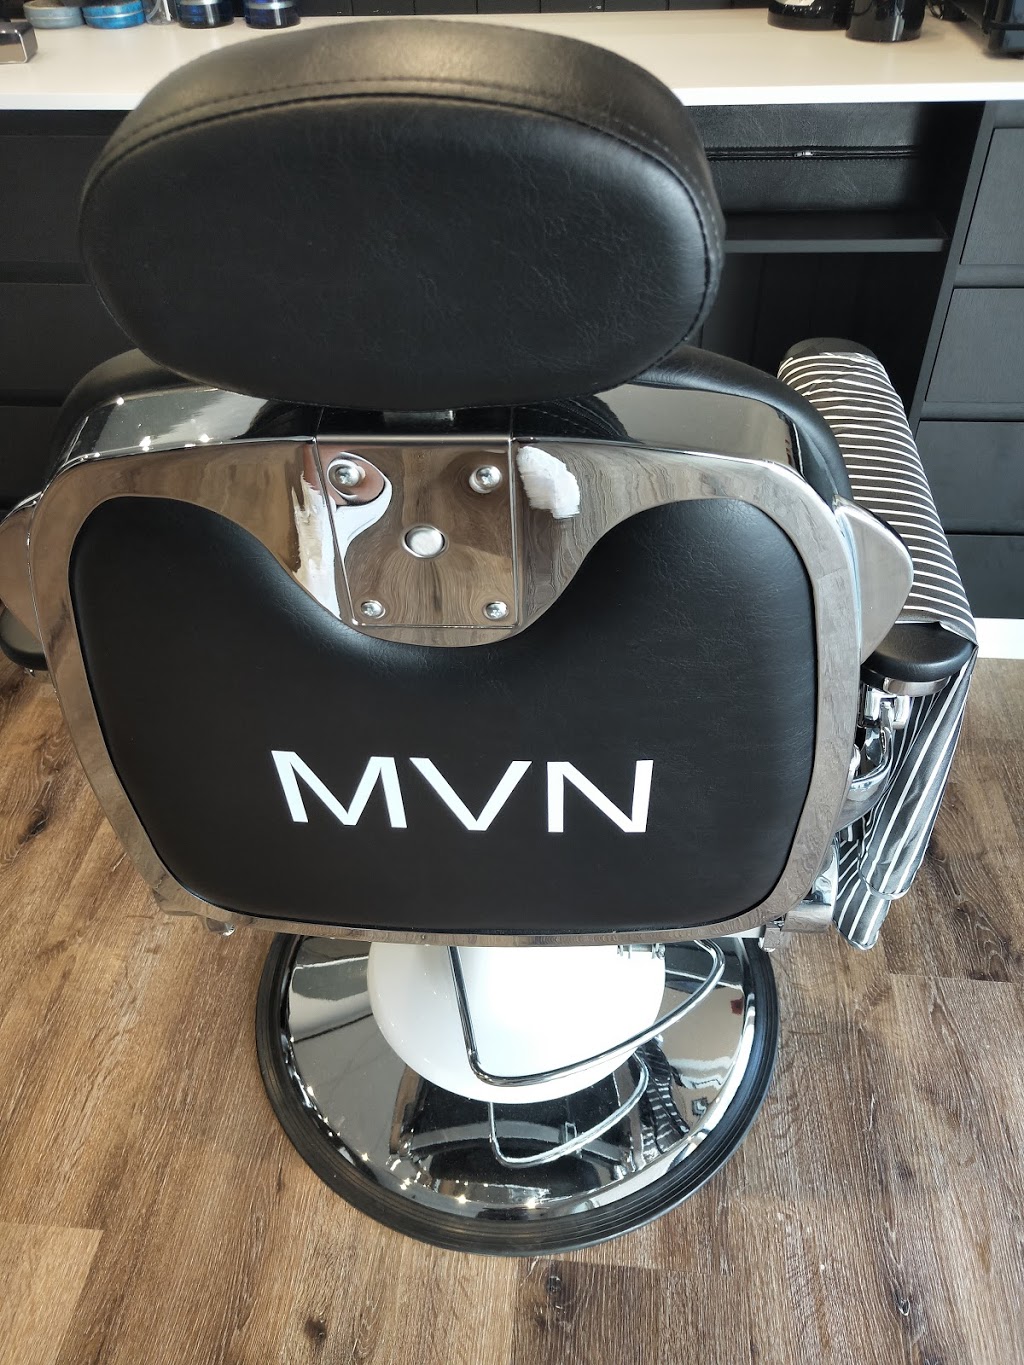 MVN Mens Grooming | 5/175 Ferry Rd, Southport QLD 4215, Australia | Phone: (07) 5663 5501